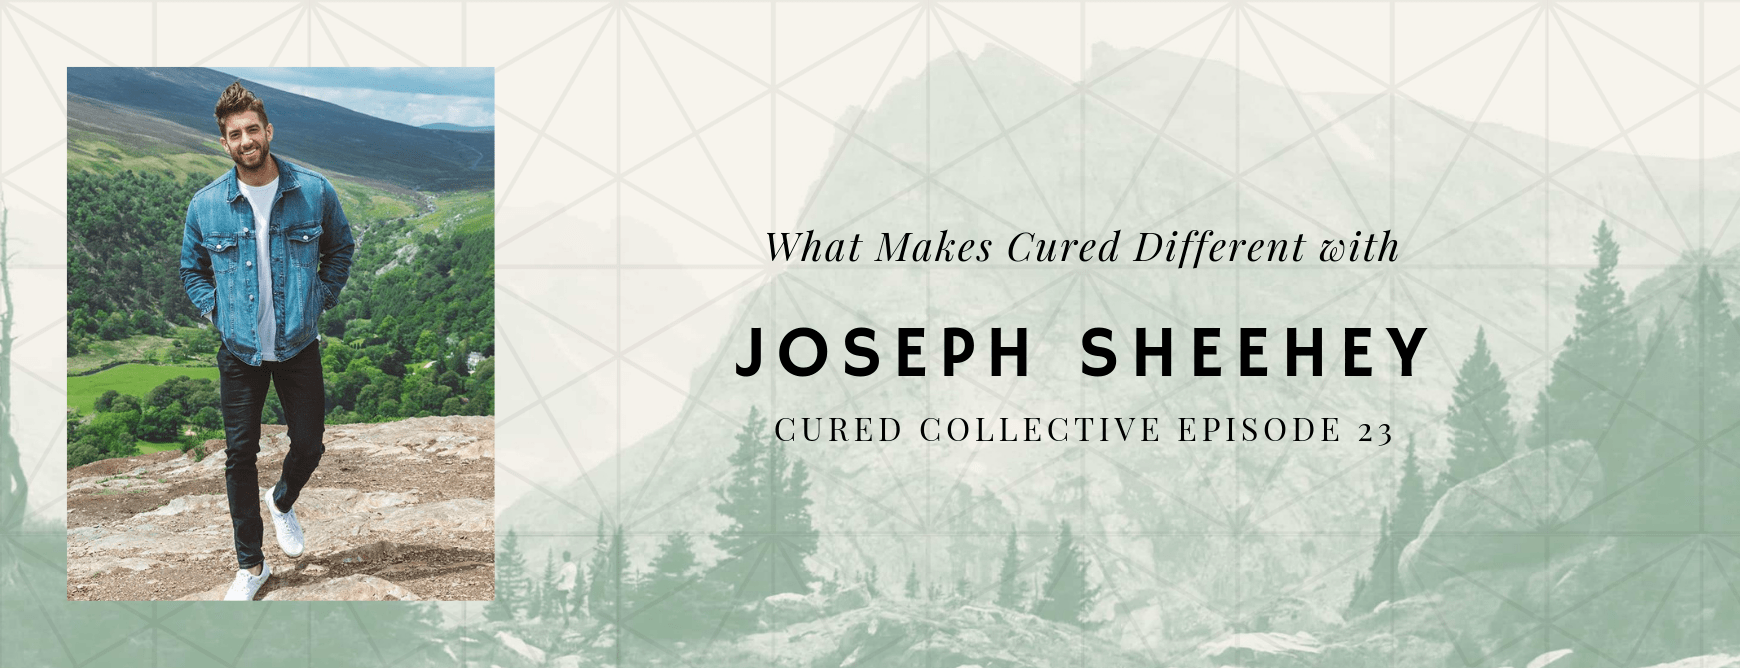 What Makes Cured Different?